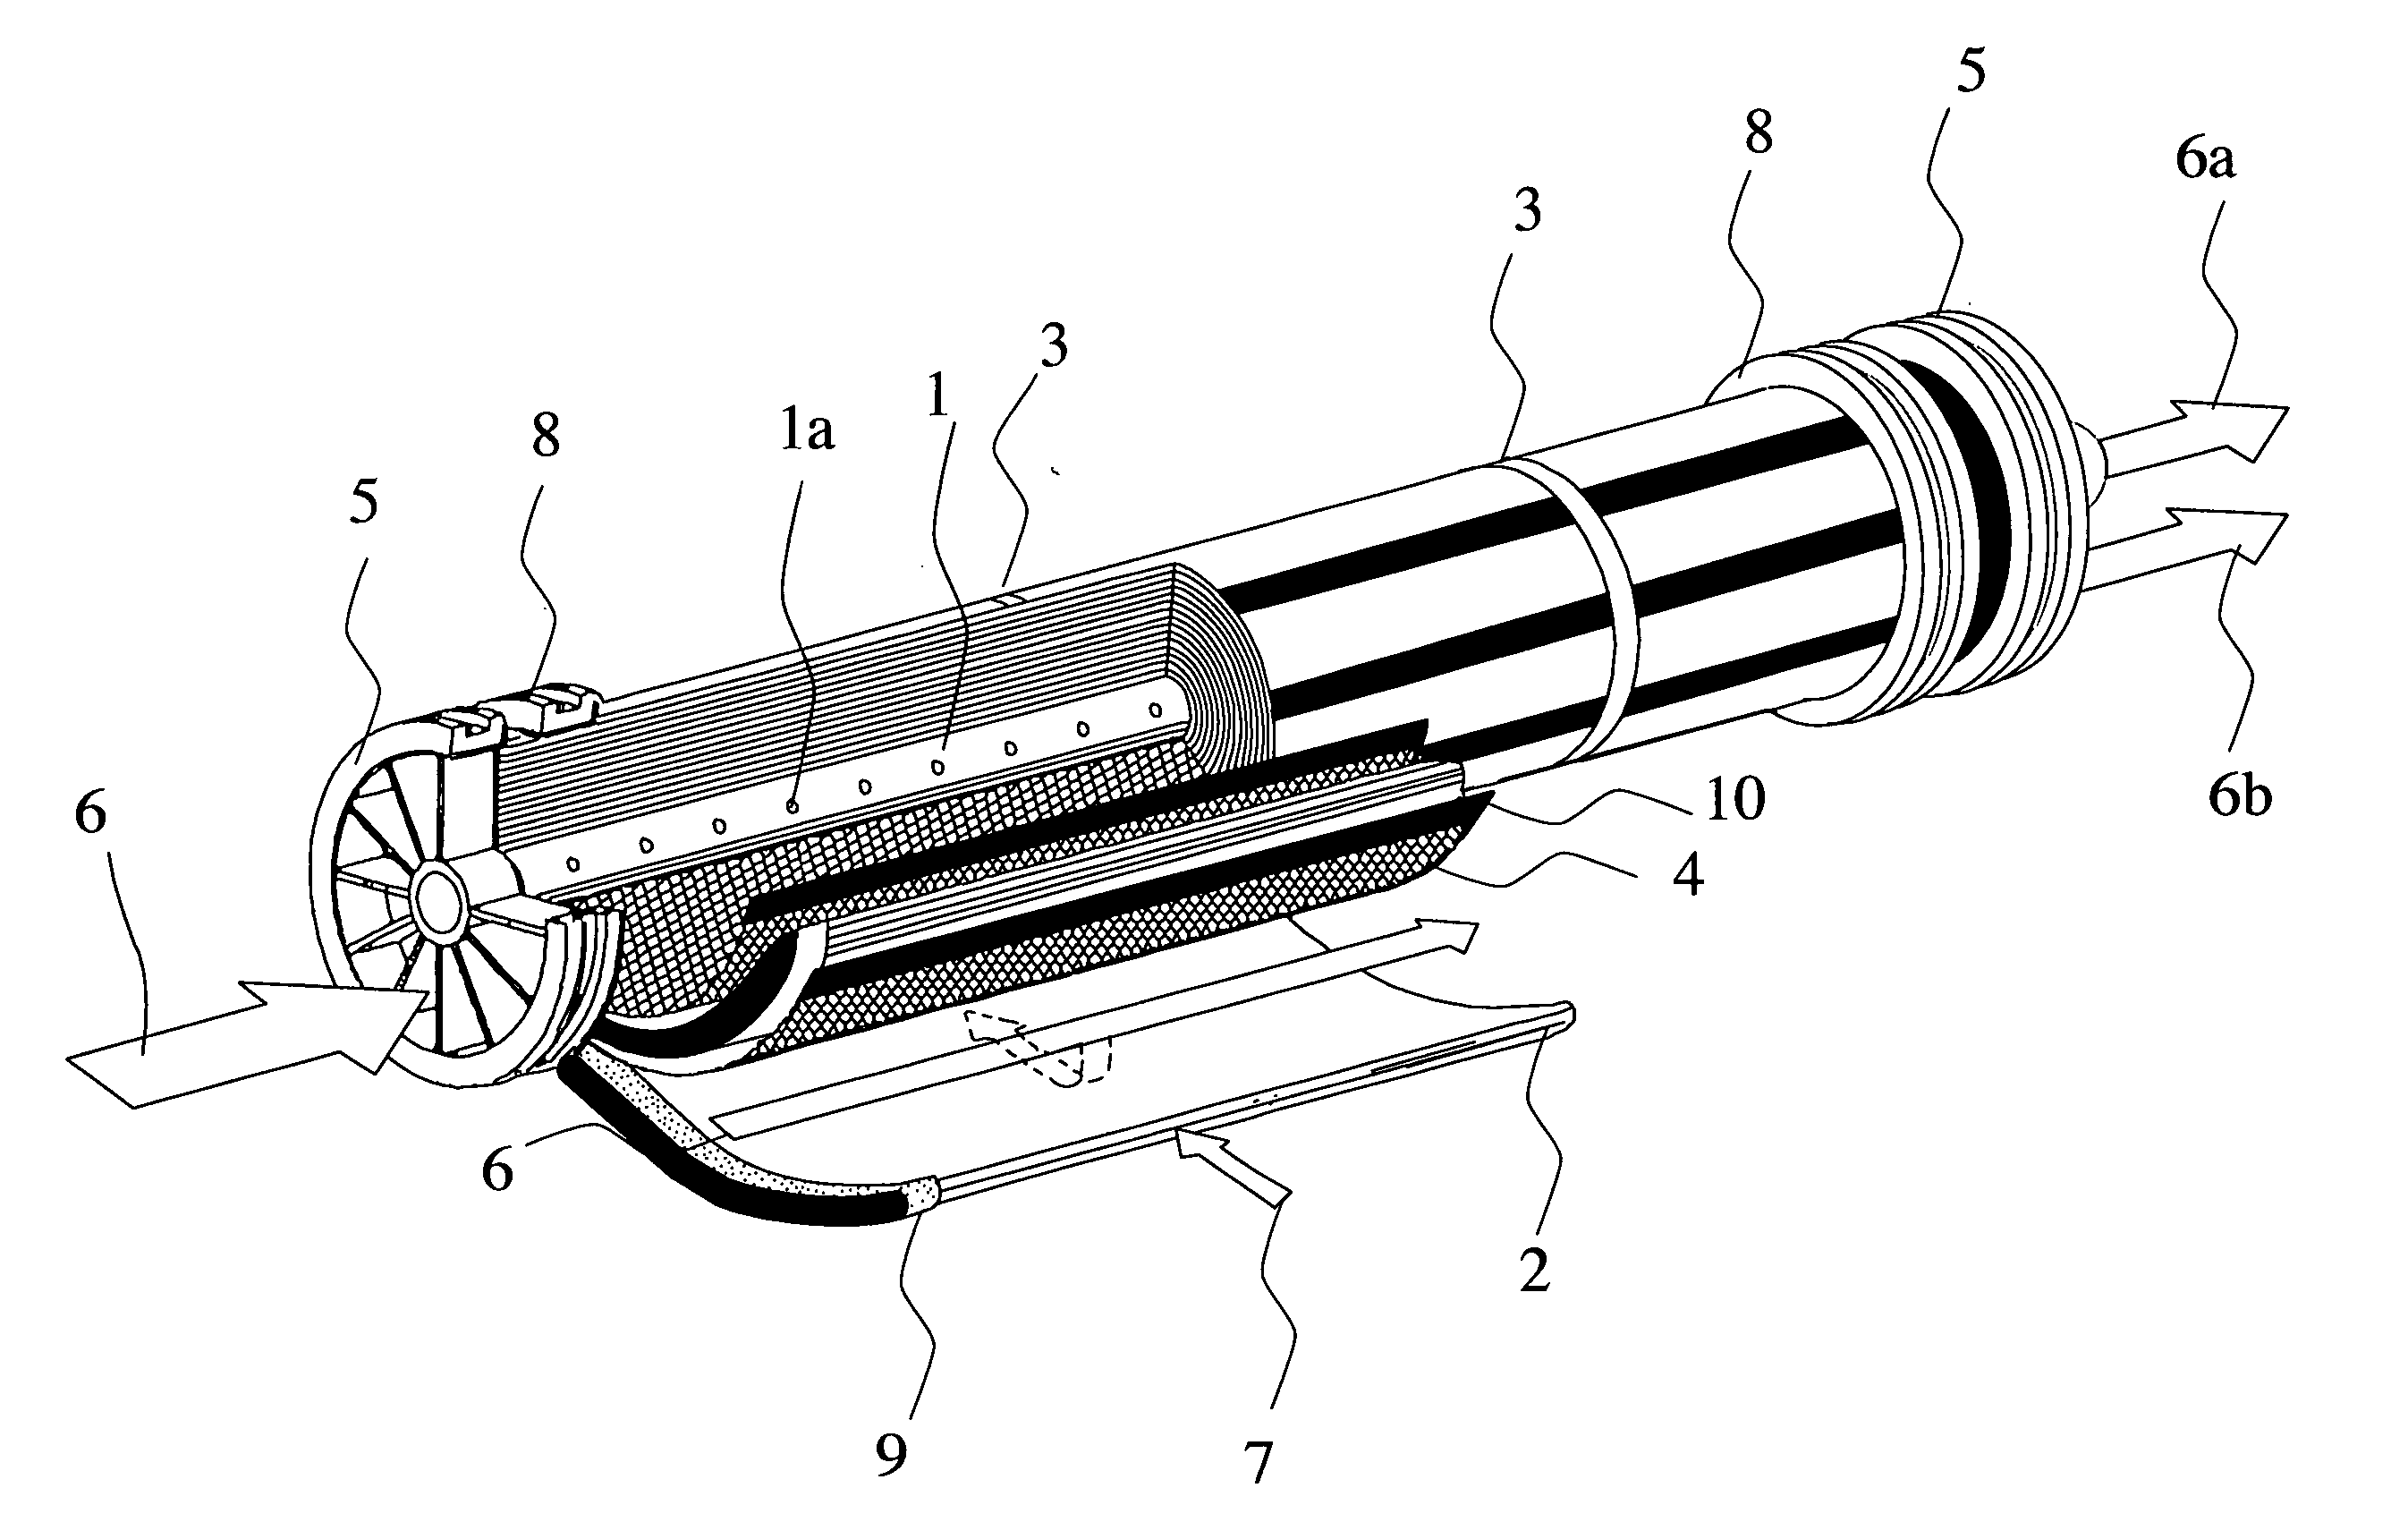 Spiral-wound liquid membrane module for separation of fluids and gases